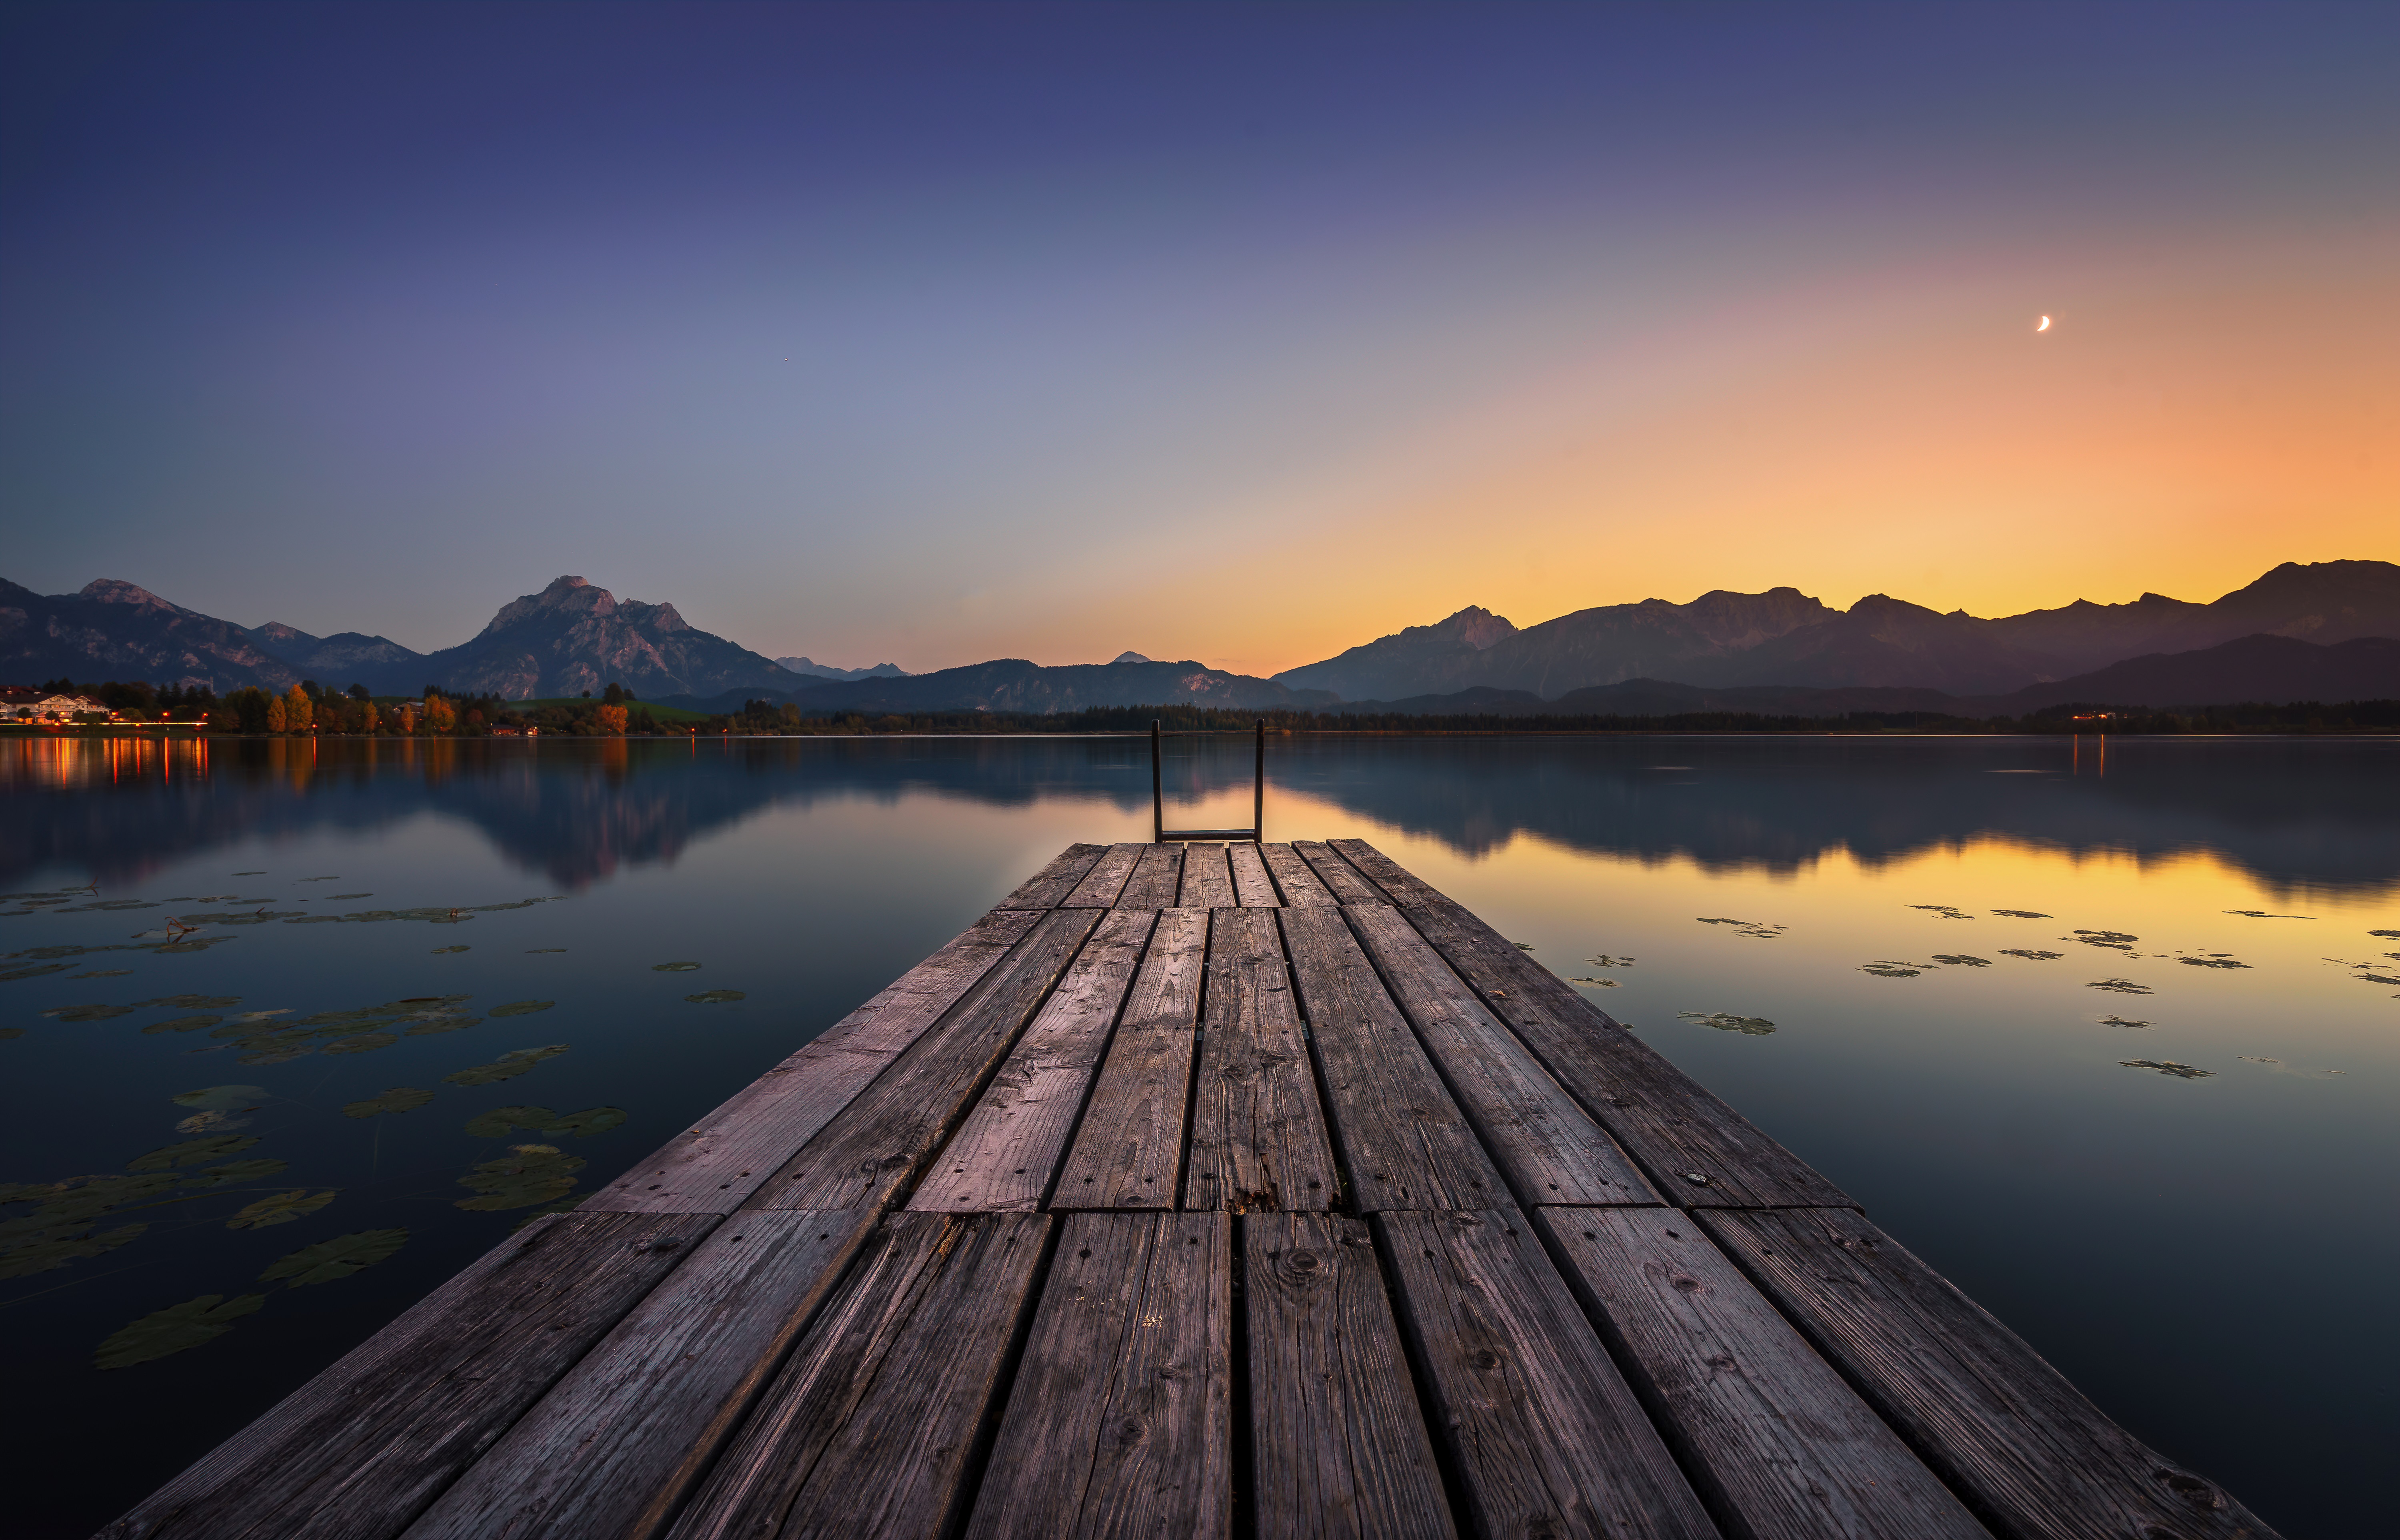 General 6000x3851 Timo Gebel sunset mountains trees water pier water lilies nature outdoors photography reflection crescent moon lights landscape Säuling Hopfensee ladder